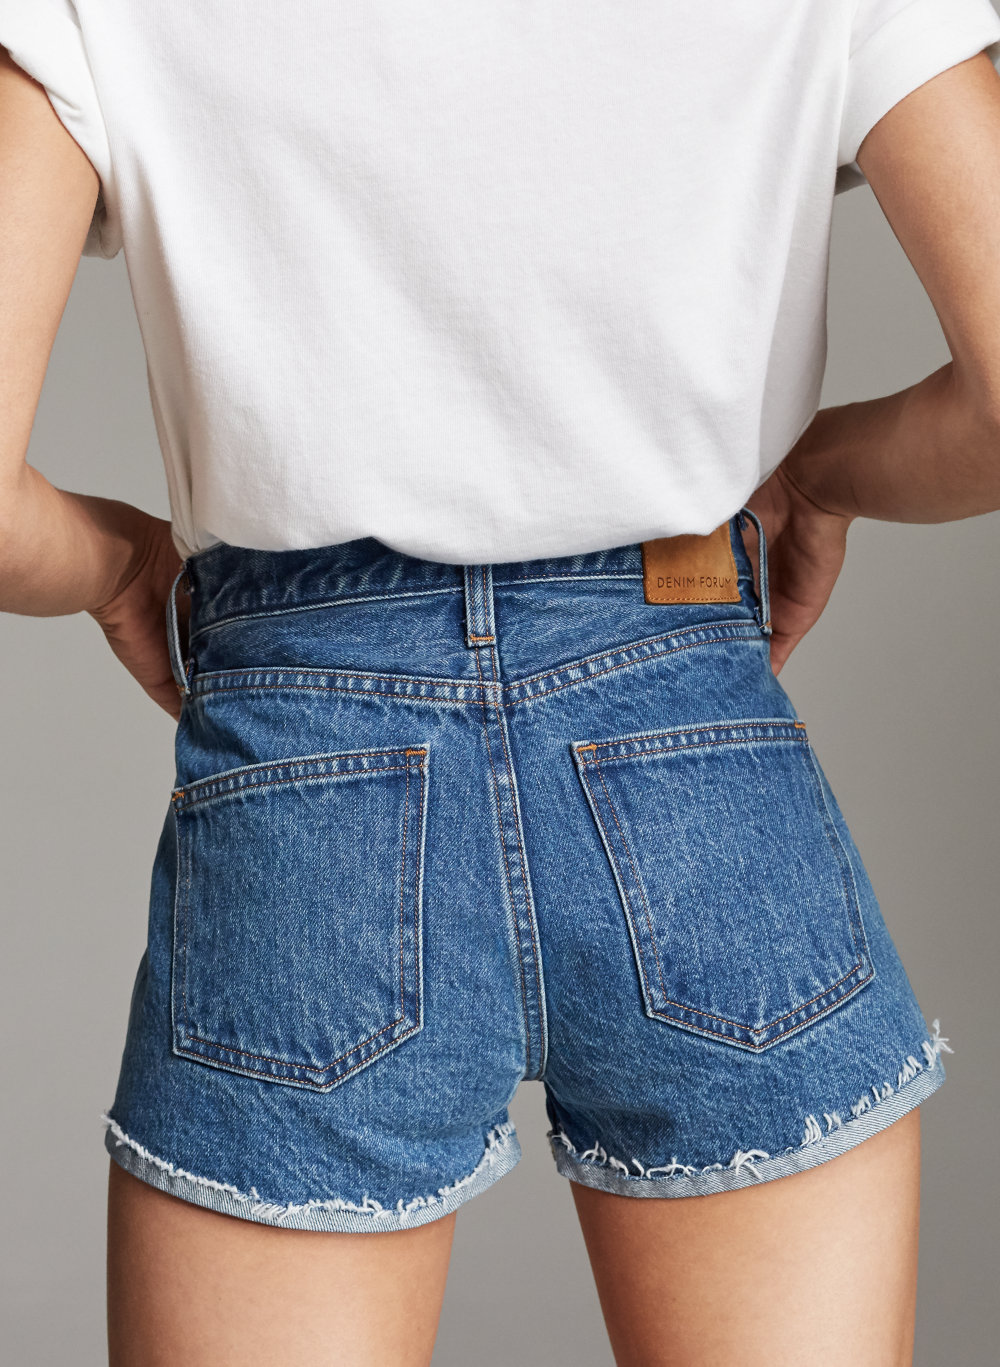 cheeky jeans shorts